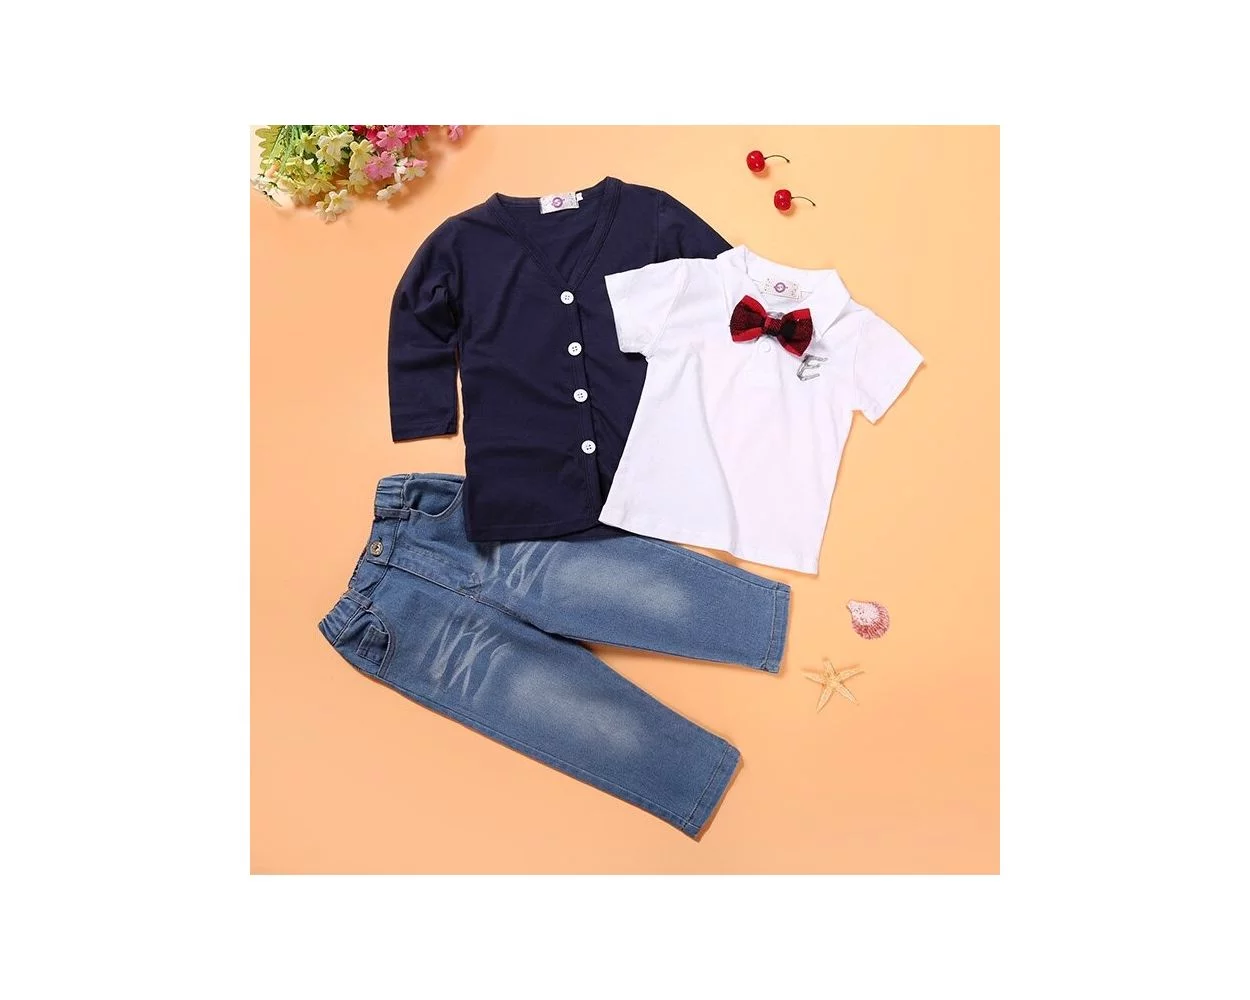 Formal Dress for Boys: Buy Online Suits for Boys | Mothercare India